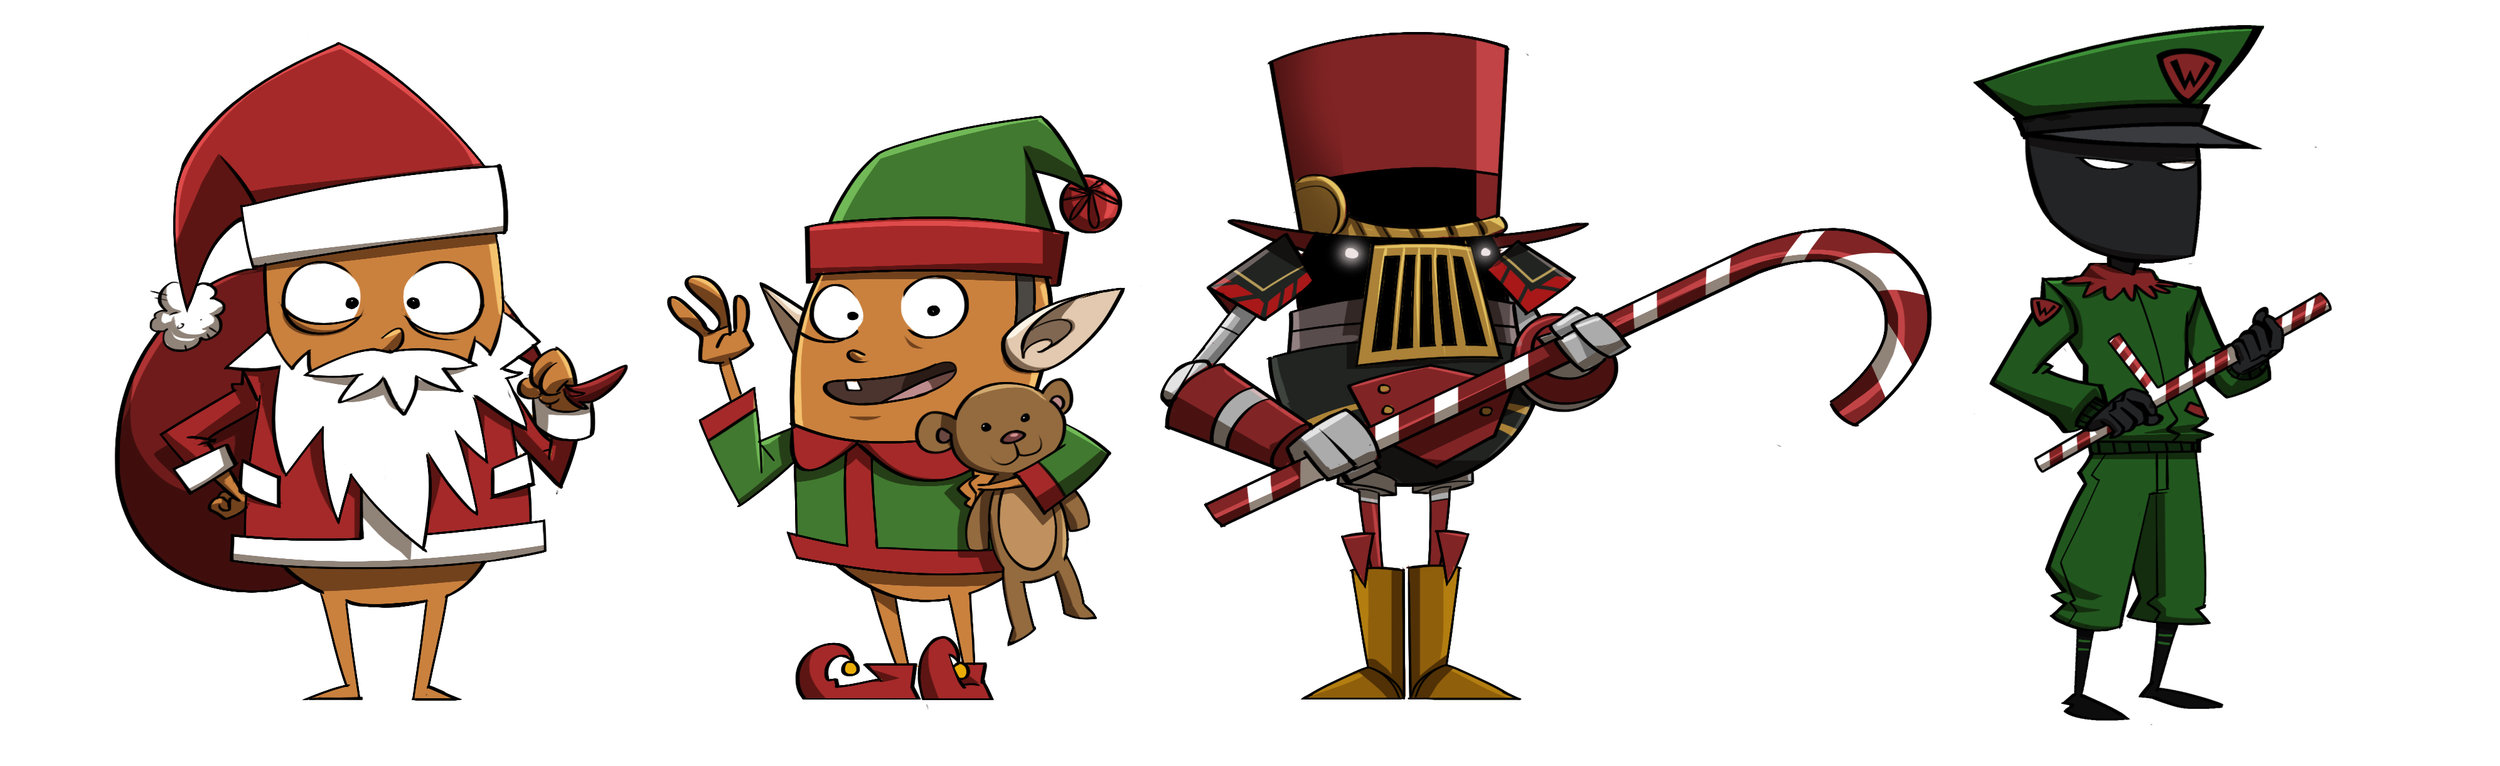 Holiday Critters.jpg